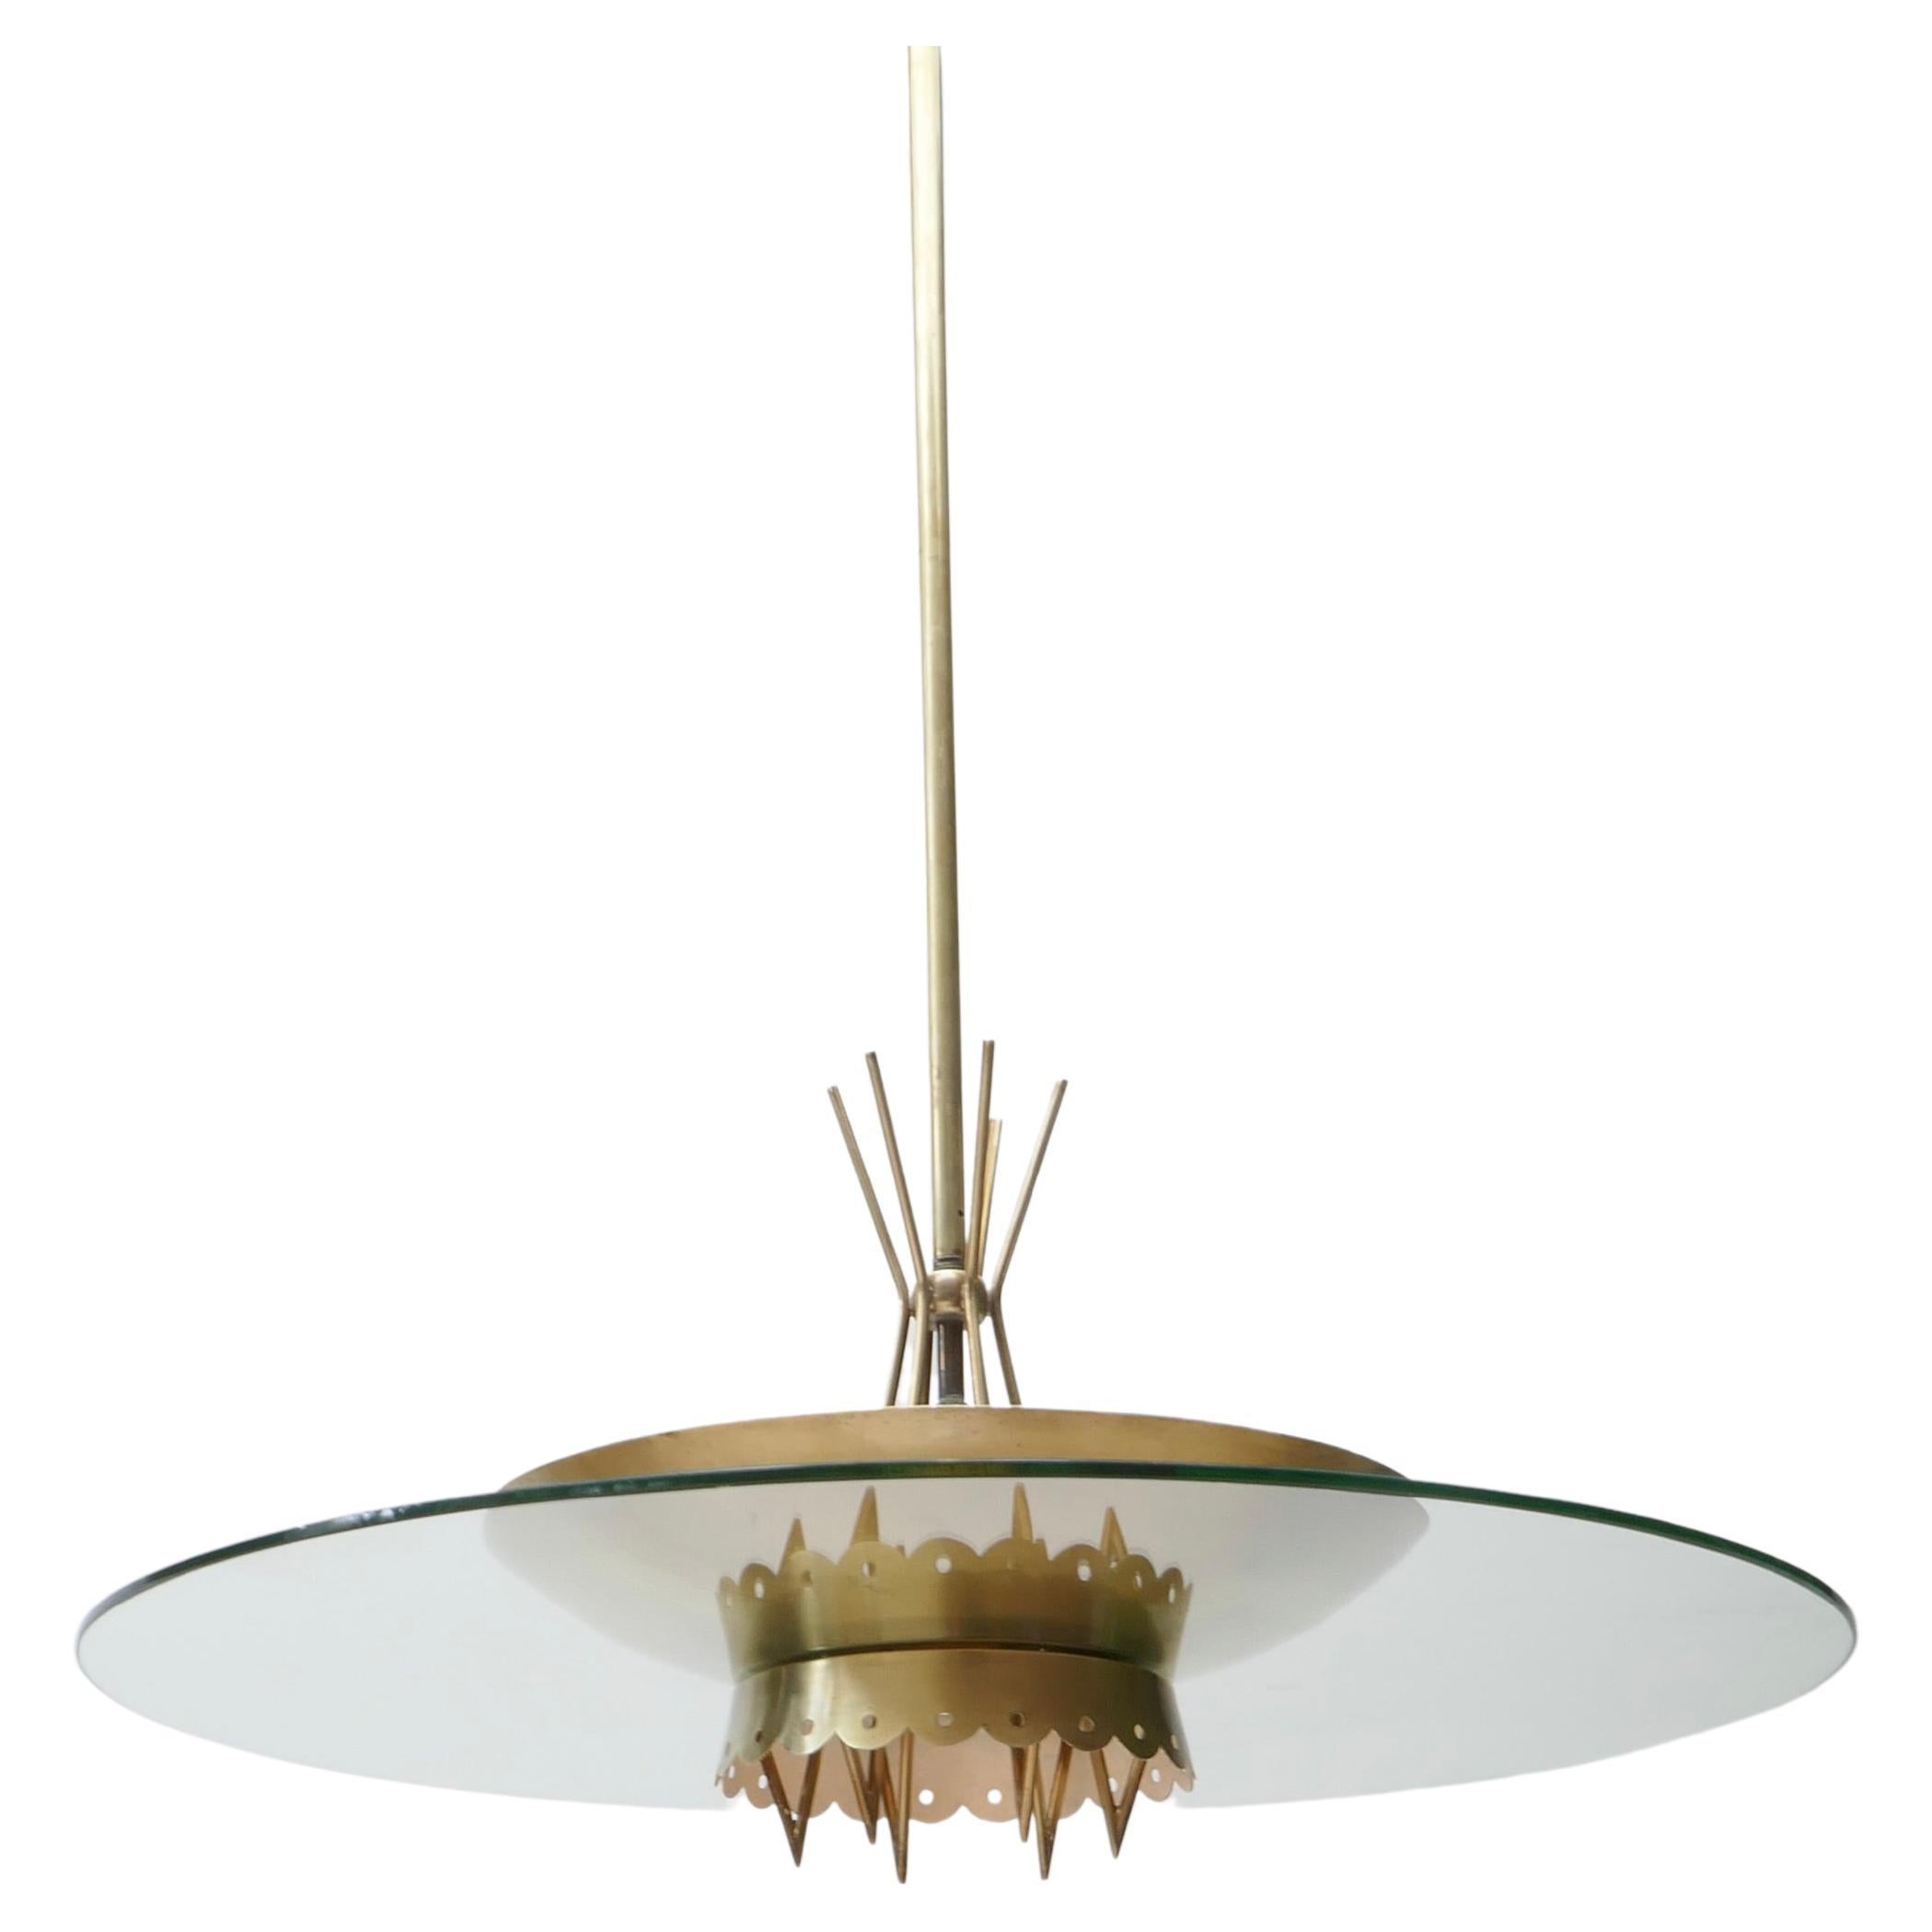 This saucer shaped chandelier is a typical expression of early 1950s Italian design in style of Fontana Arte style UFO chandelier. 
Top dish is clear glass. Artful brass details embellish the outer ring and the rod 
Total height is 94cm (